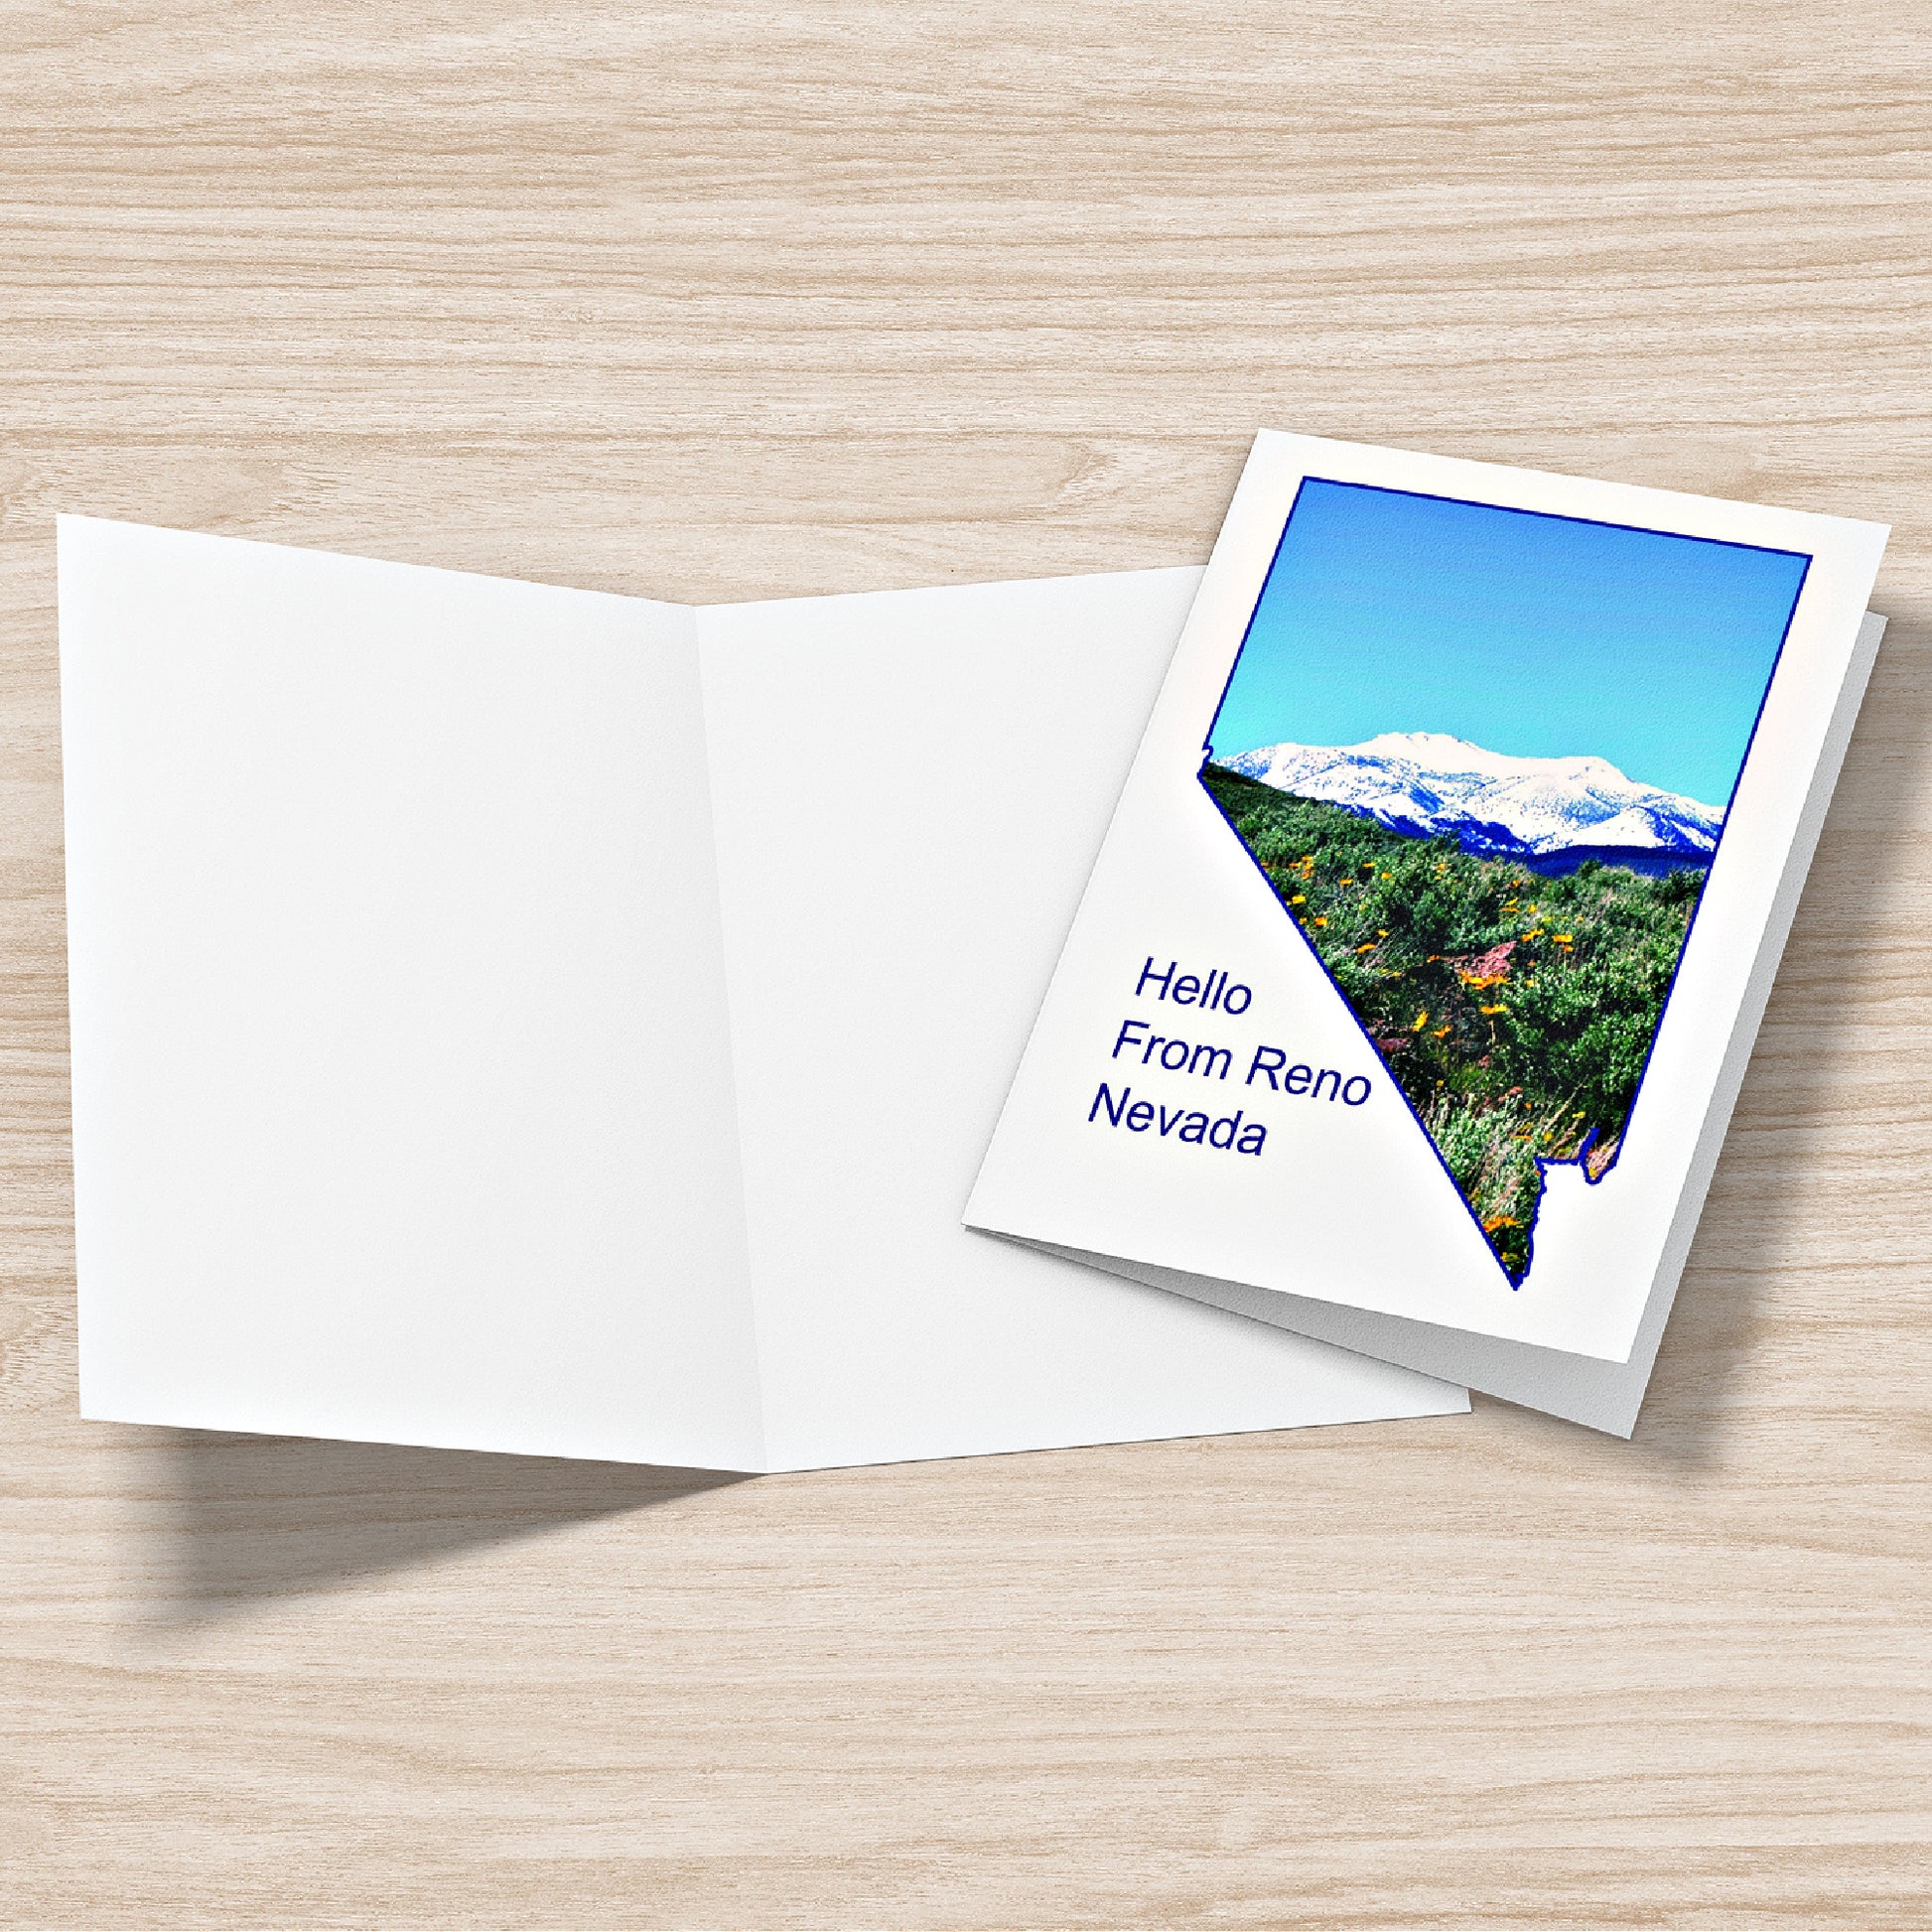 Mock up of our Hello From Reno greeting card front and a blank inside view on a table